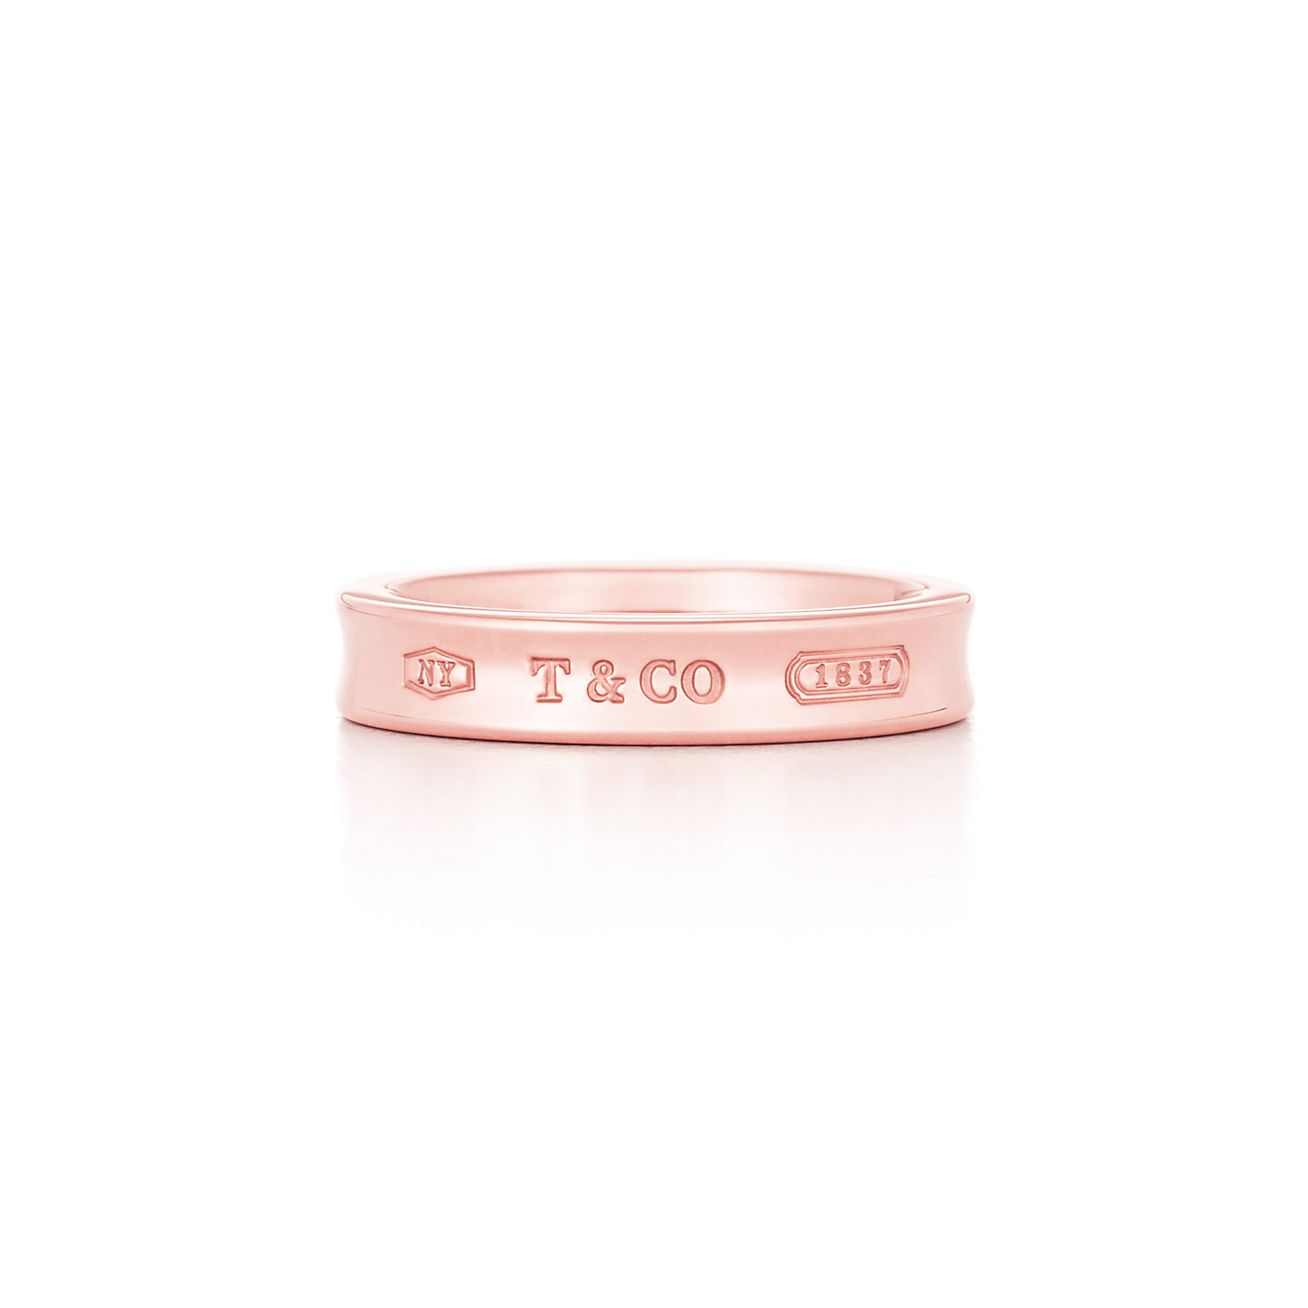 t & co ring 1837